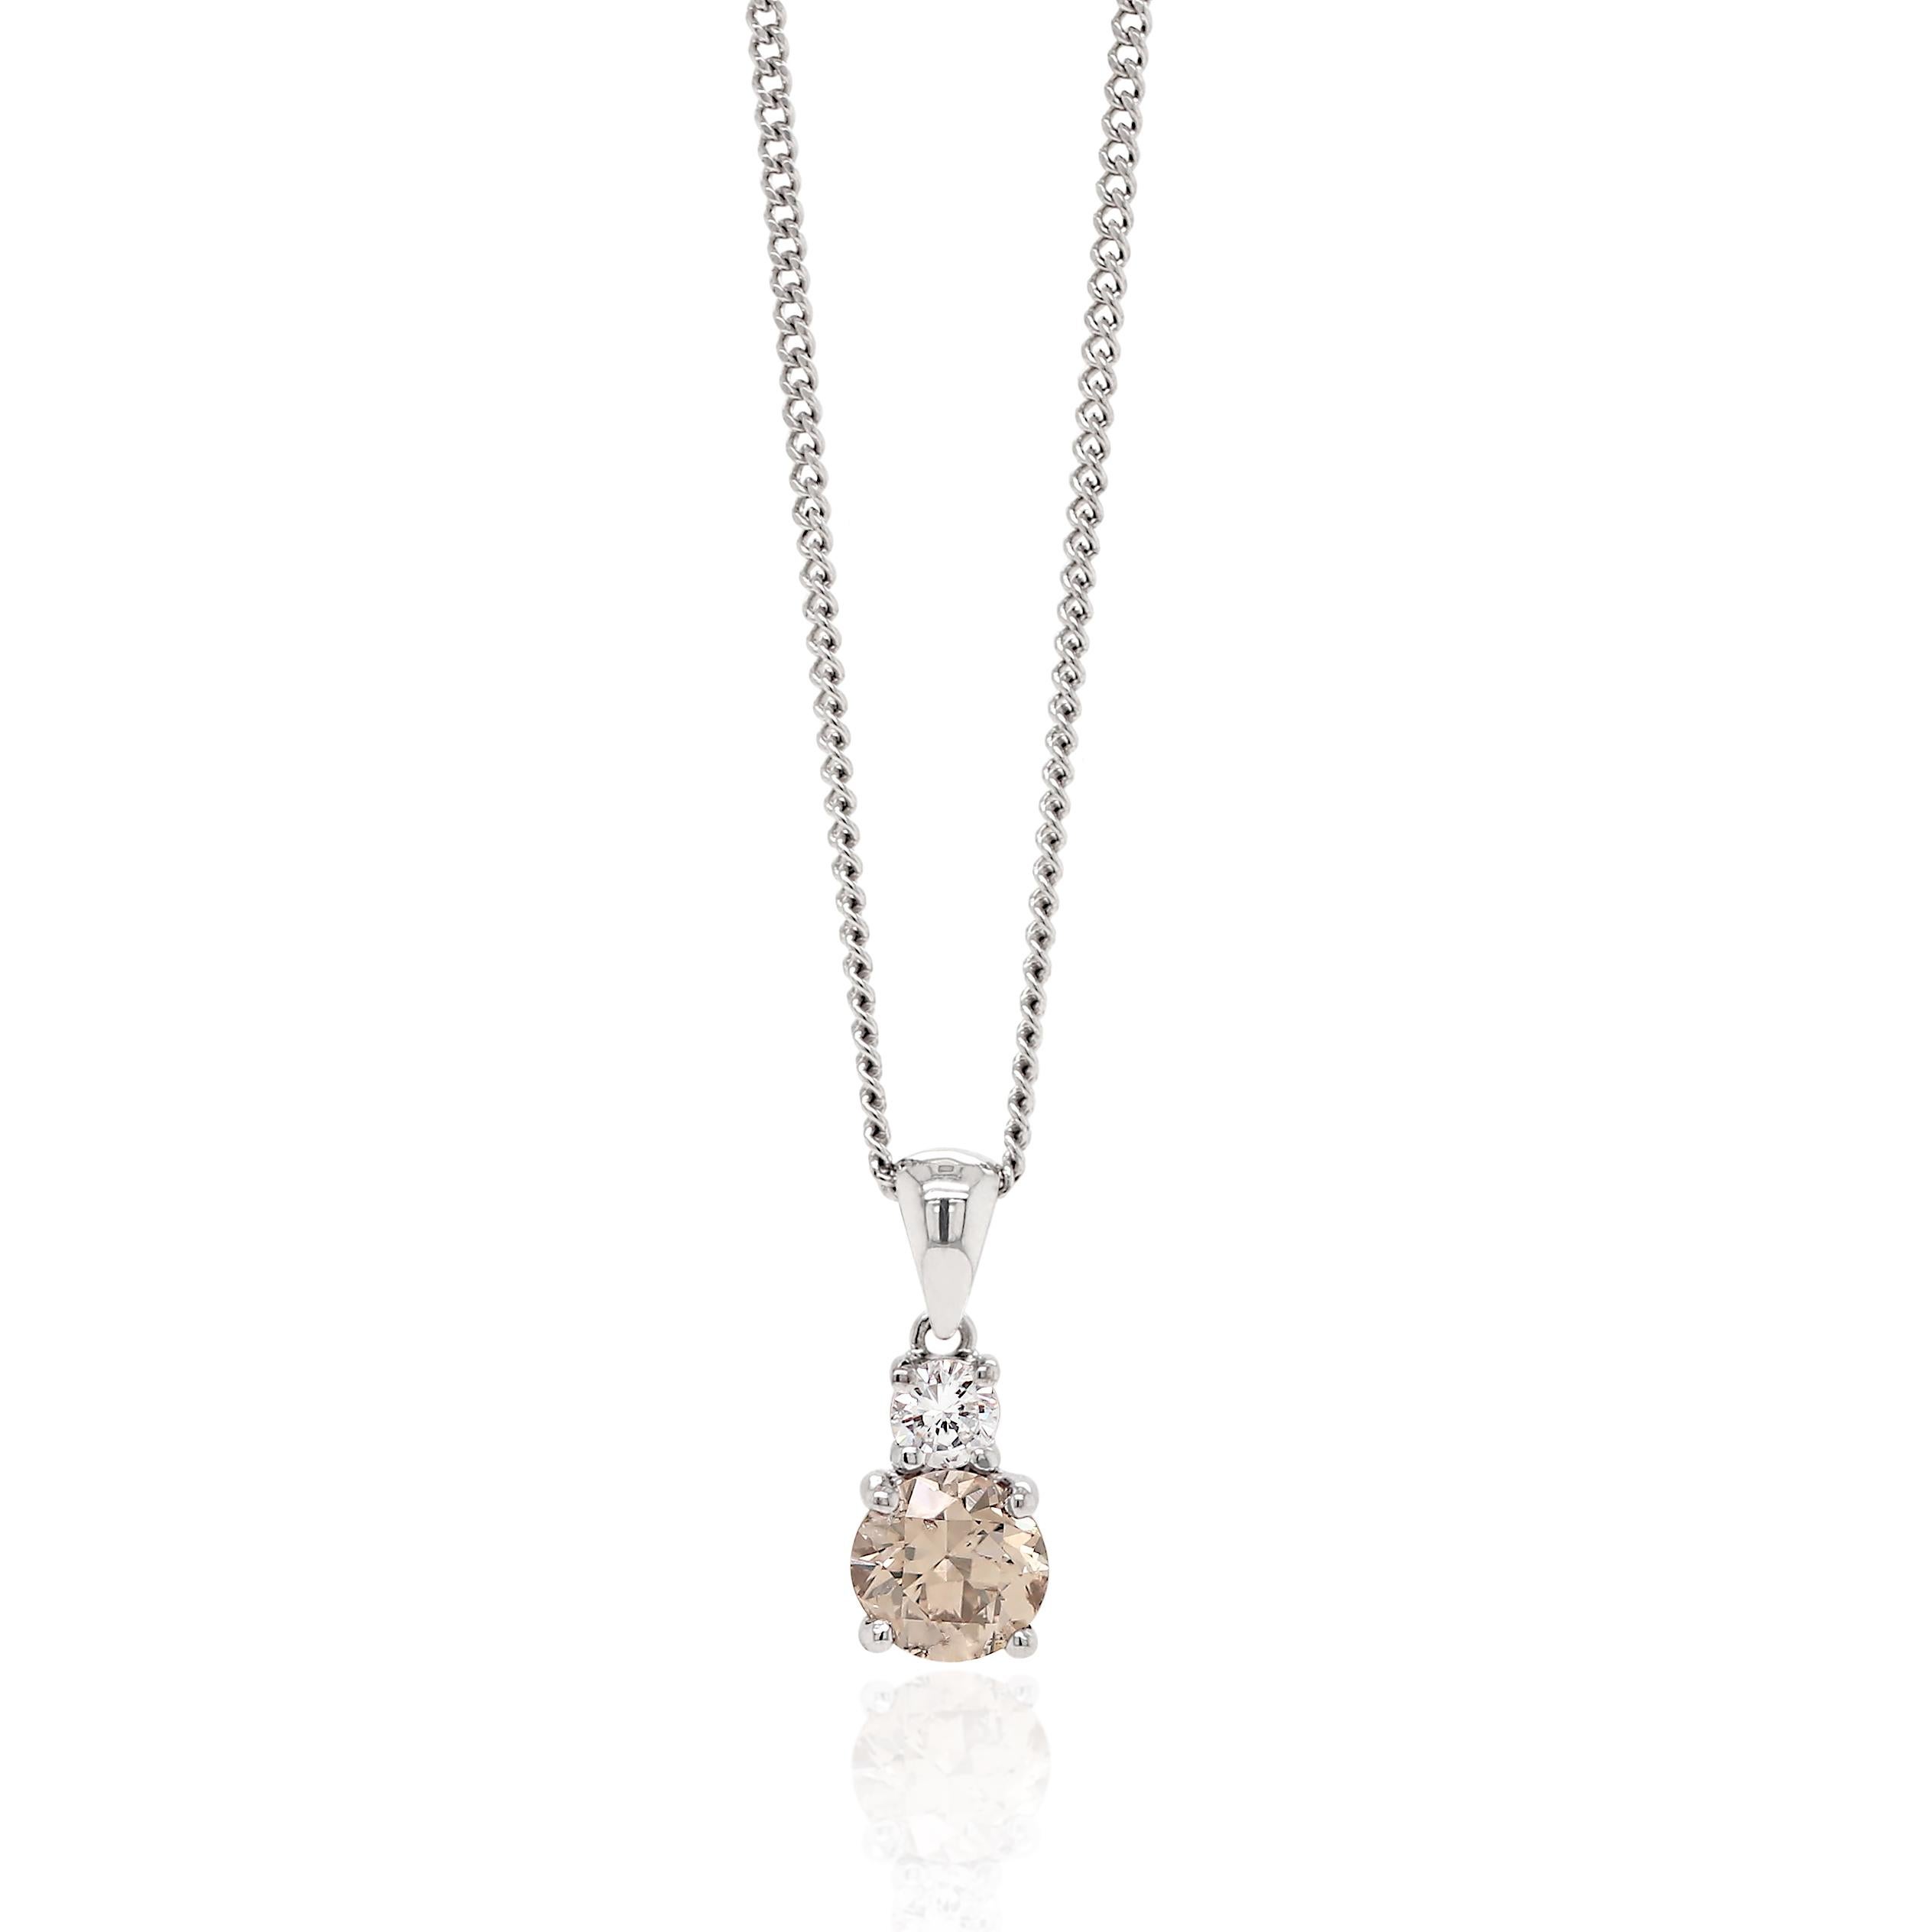 Beautiful pendant featuring a fancy brown round brilliant cut diamond weighing 0.80ct in a four claw, open back setting. The diamond is wonderfully accompanied by a white round brilliant cut diamond above it weighing 0.12ct in a four claw setting,